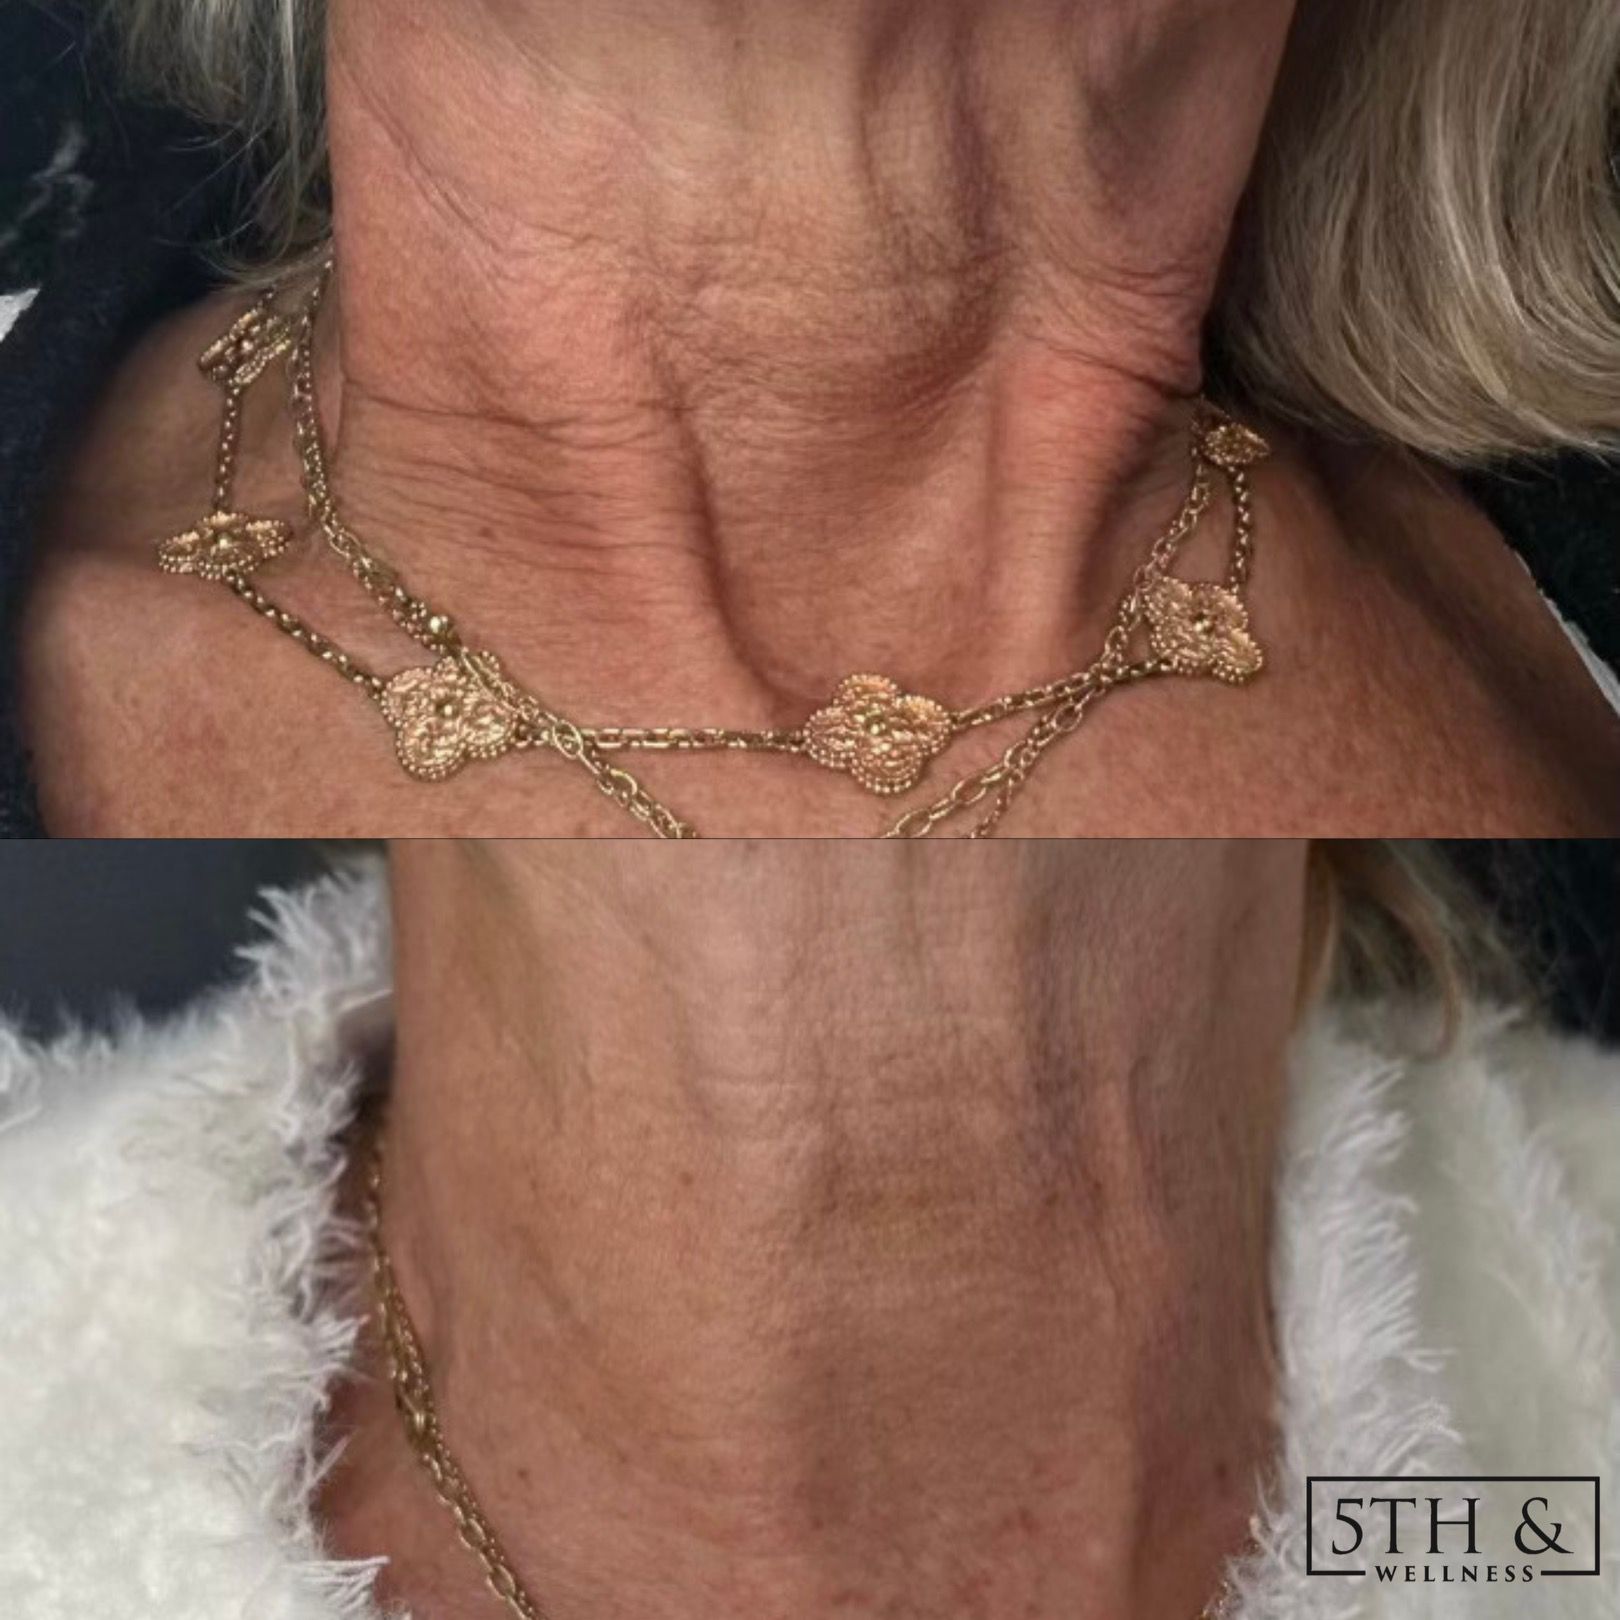 before and after results from Hyperdilute Radiesse treatment